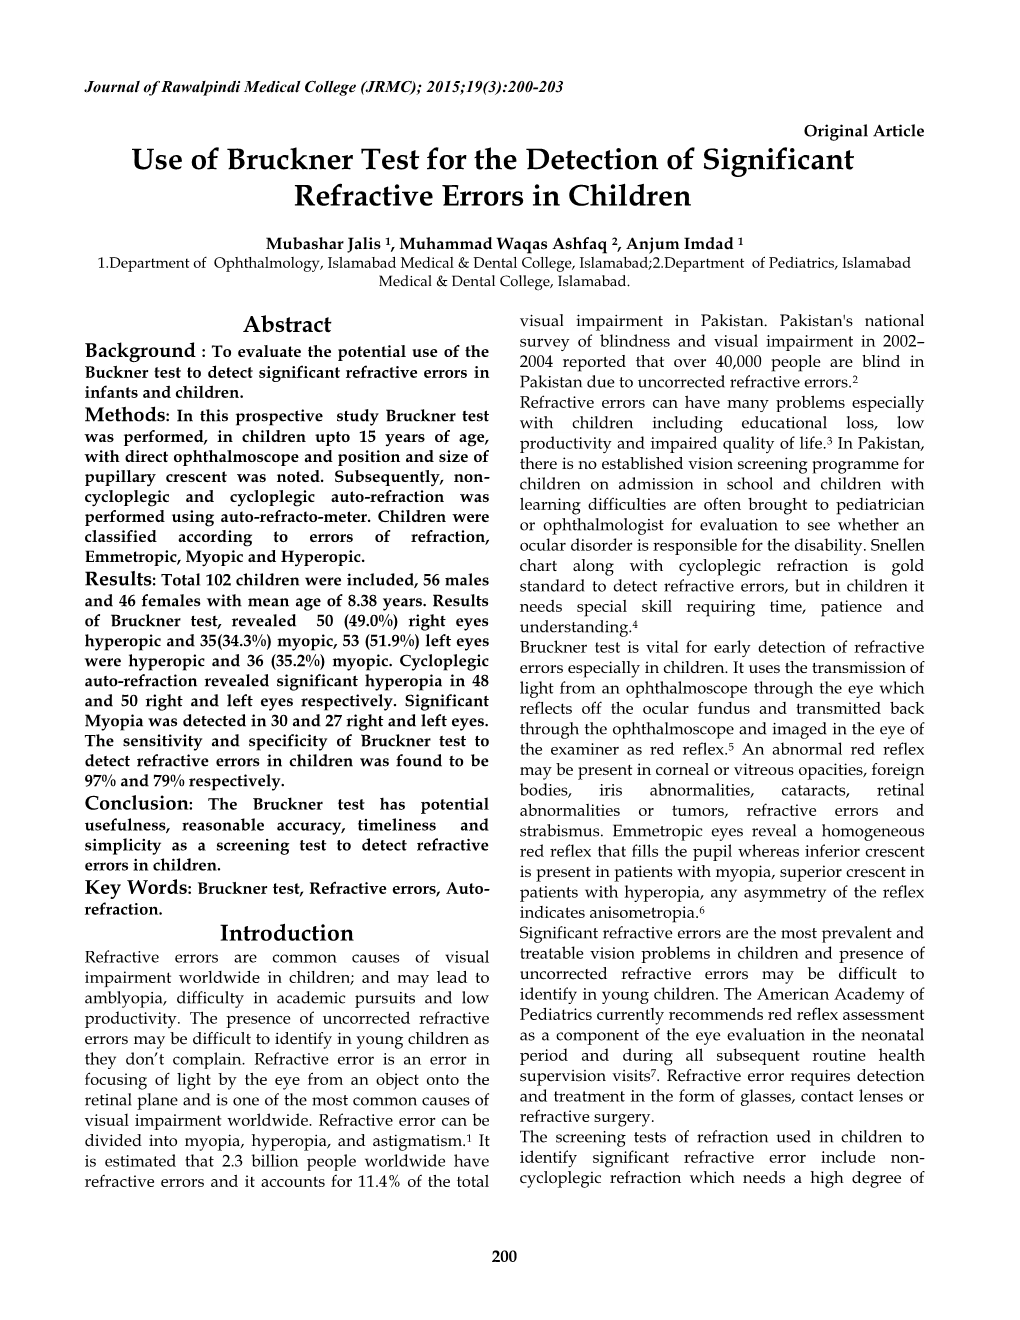 Use of Bruckner Test for the Detection of Significant Refractive Errors in Children